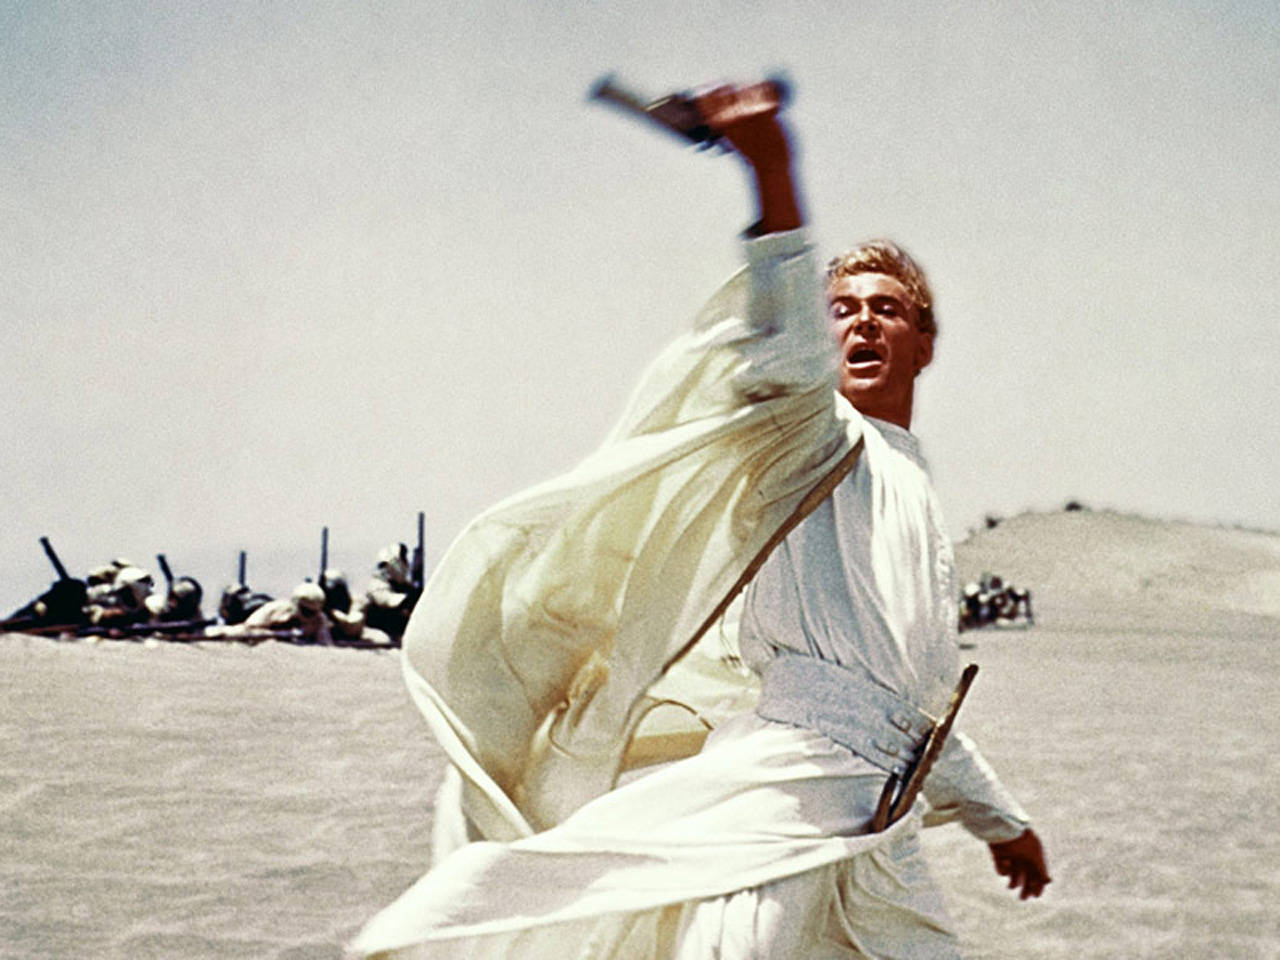 Peter O'Toole stadig som T. E. Lawrence Wallpaper